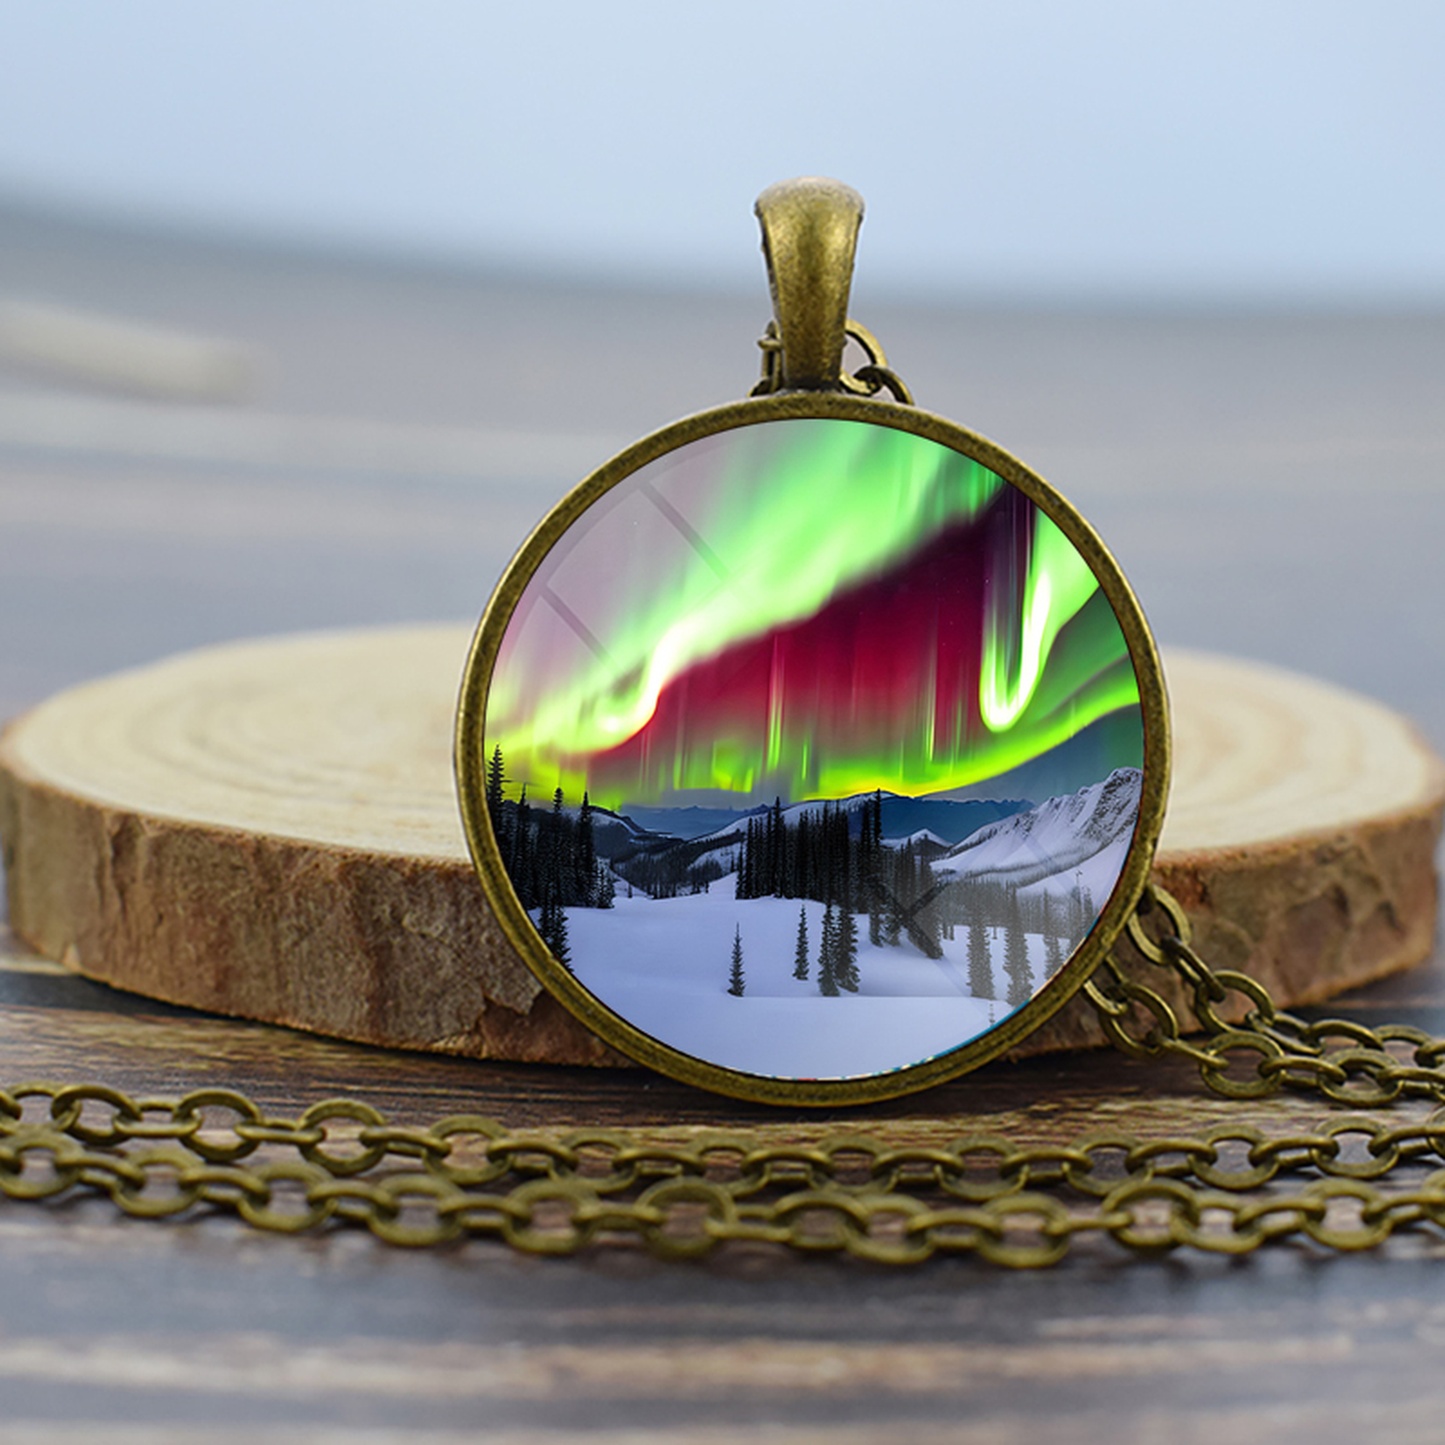 Unique Aurora Borealis Bronze Necklace - Northern Light Jewelry - Glass Dome Pendent Necklace - Perfect Aurora Lovers Gift 9